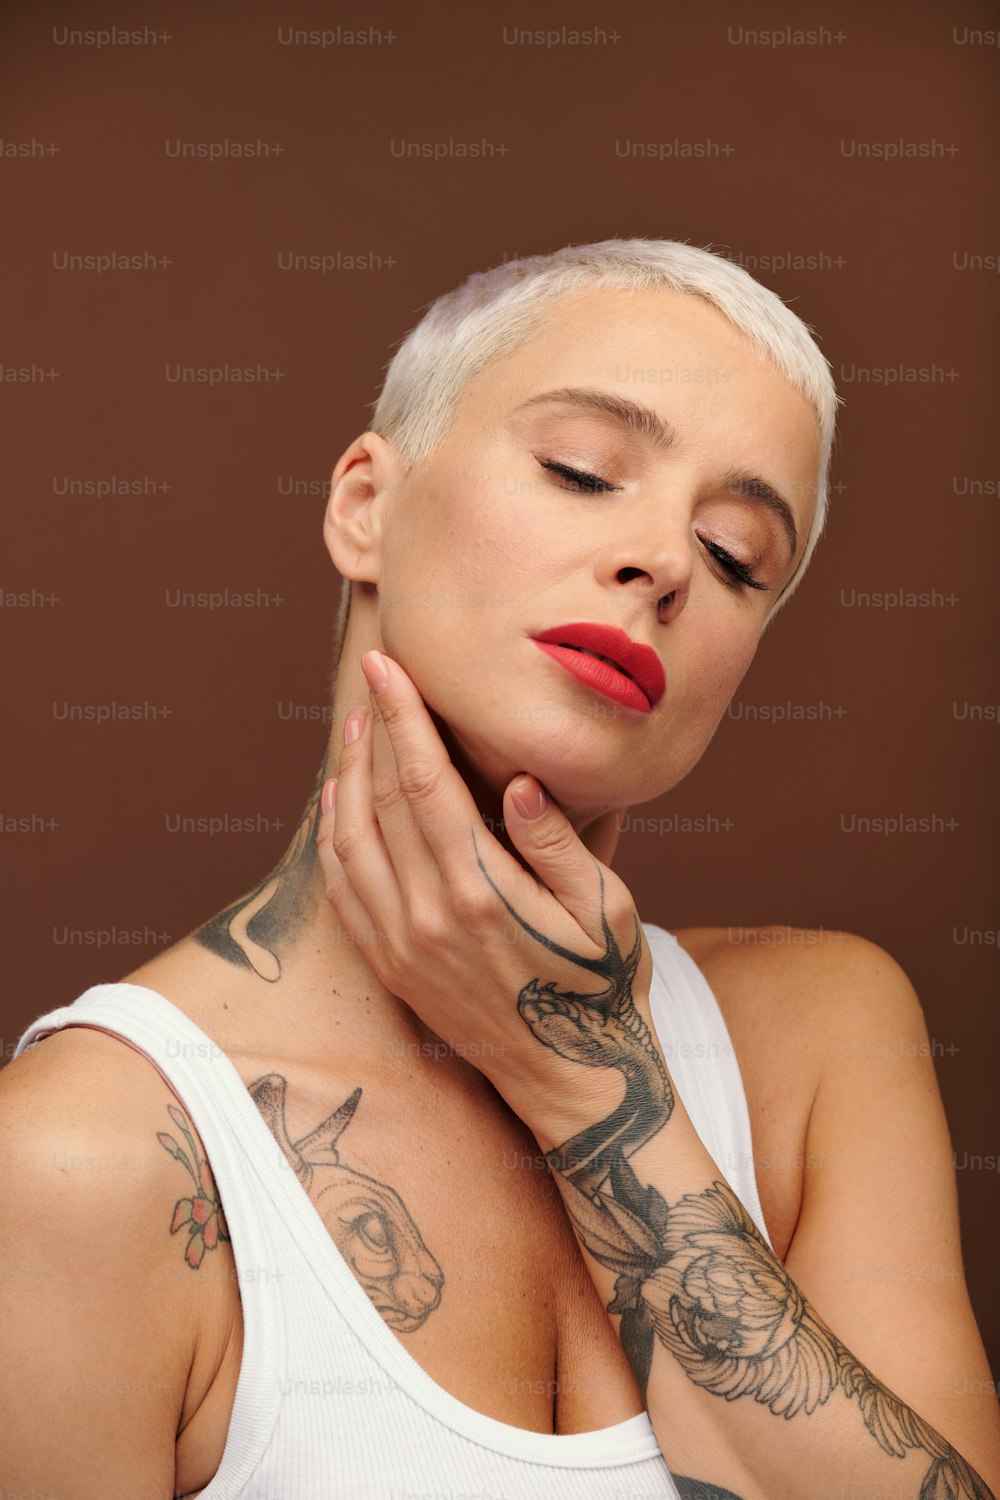 Mature blond female with tattooes on arm touching her face by hand and keeping her eyes closed while standing in front of camera in isolation